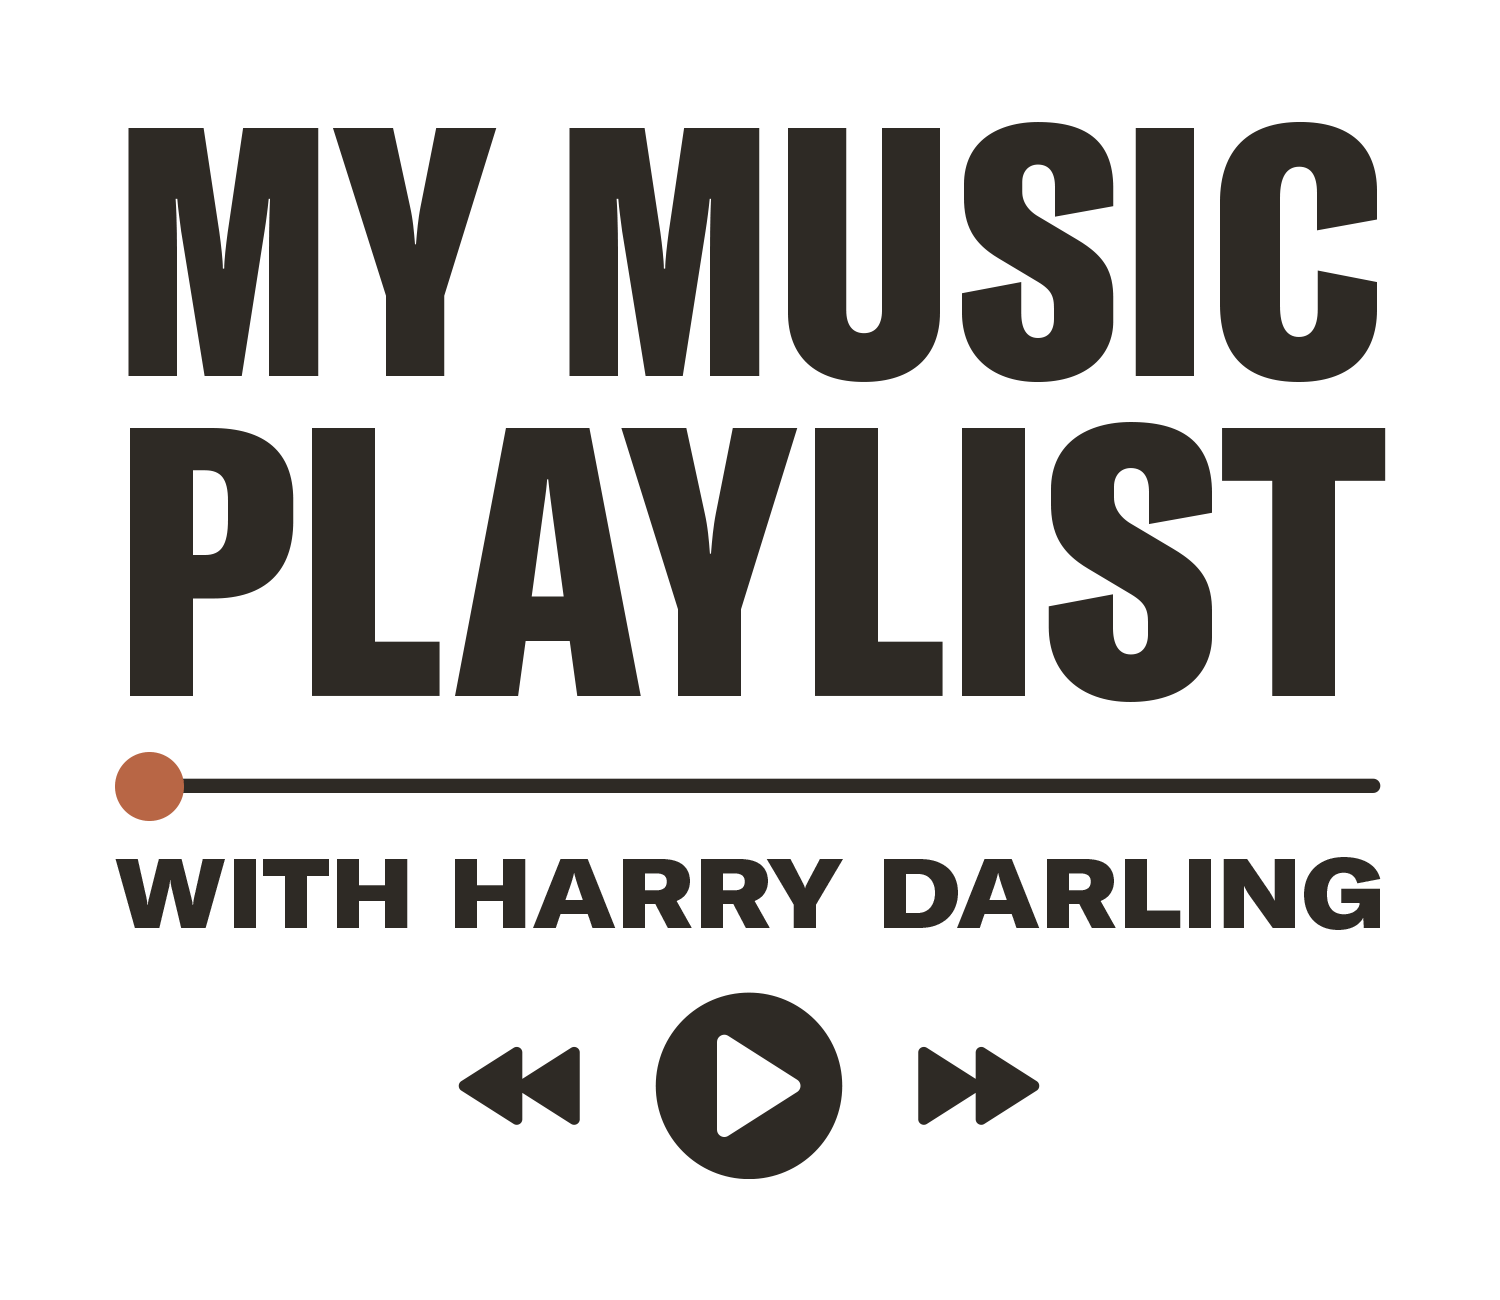 My Music Playlist with Harry Darling